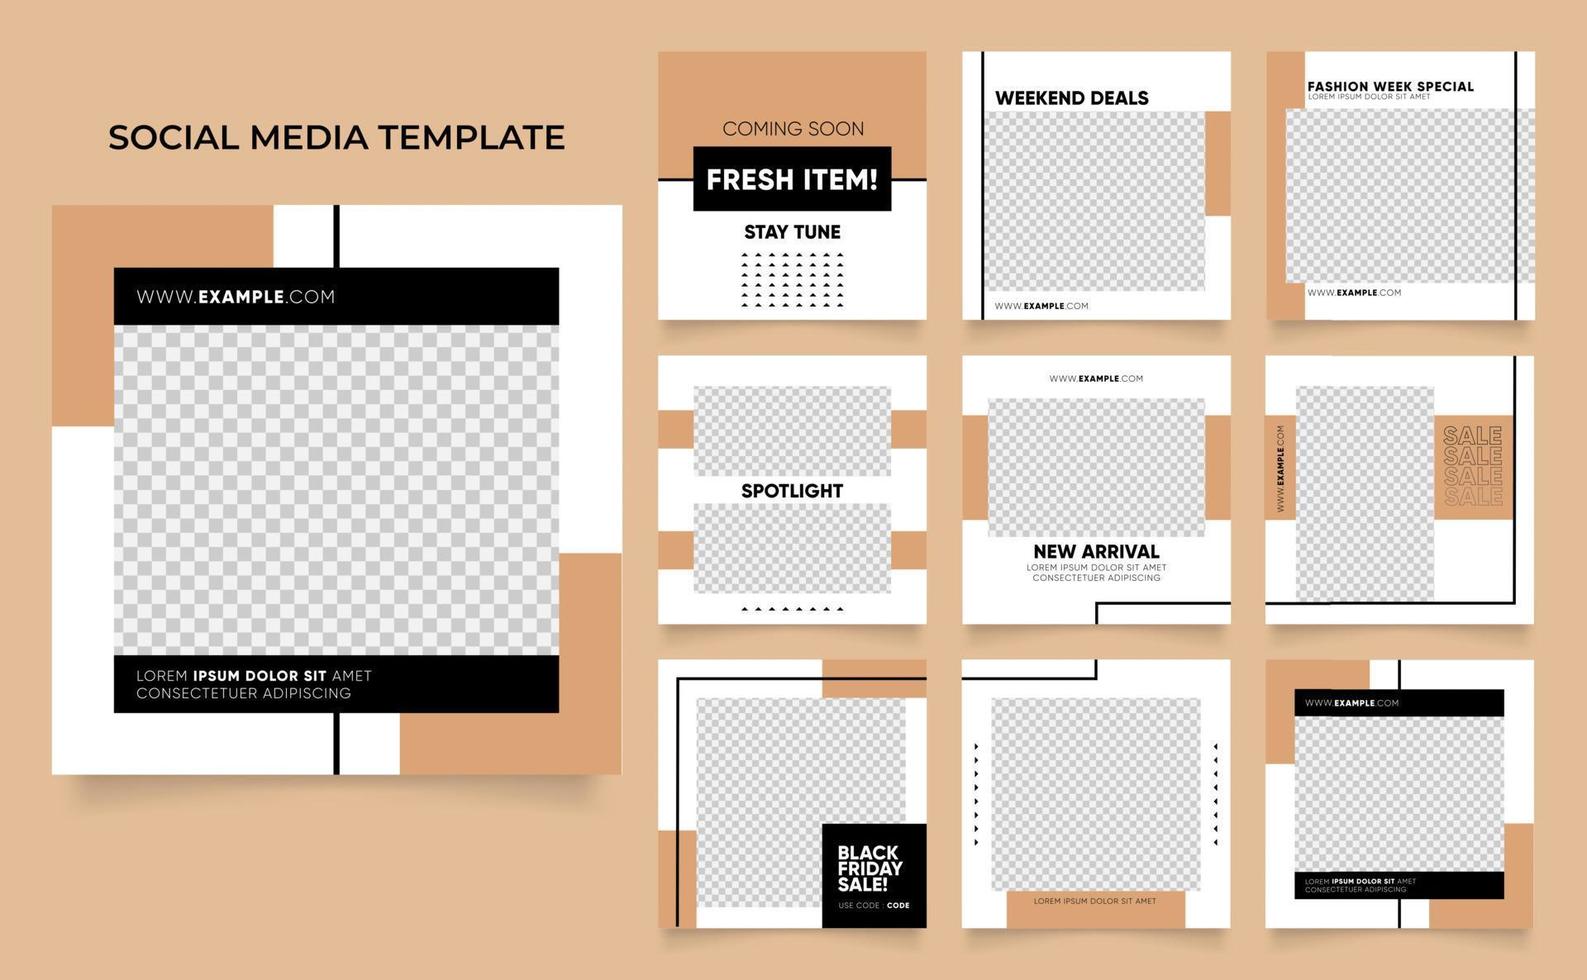 social media template banner fashion sale promotion in brown beige color. vector